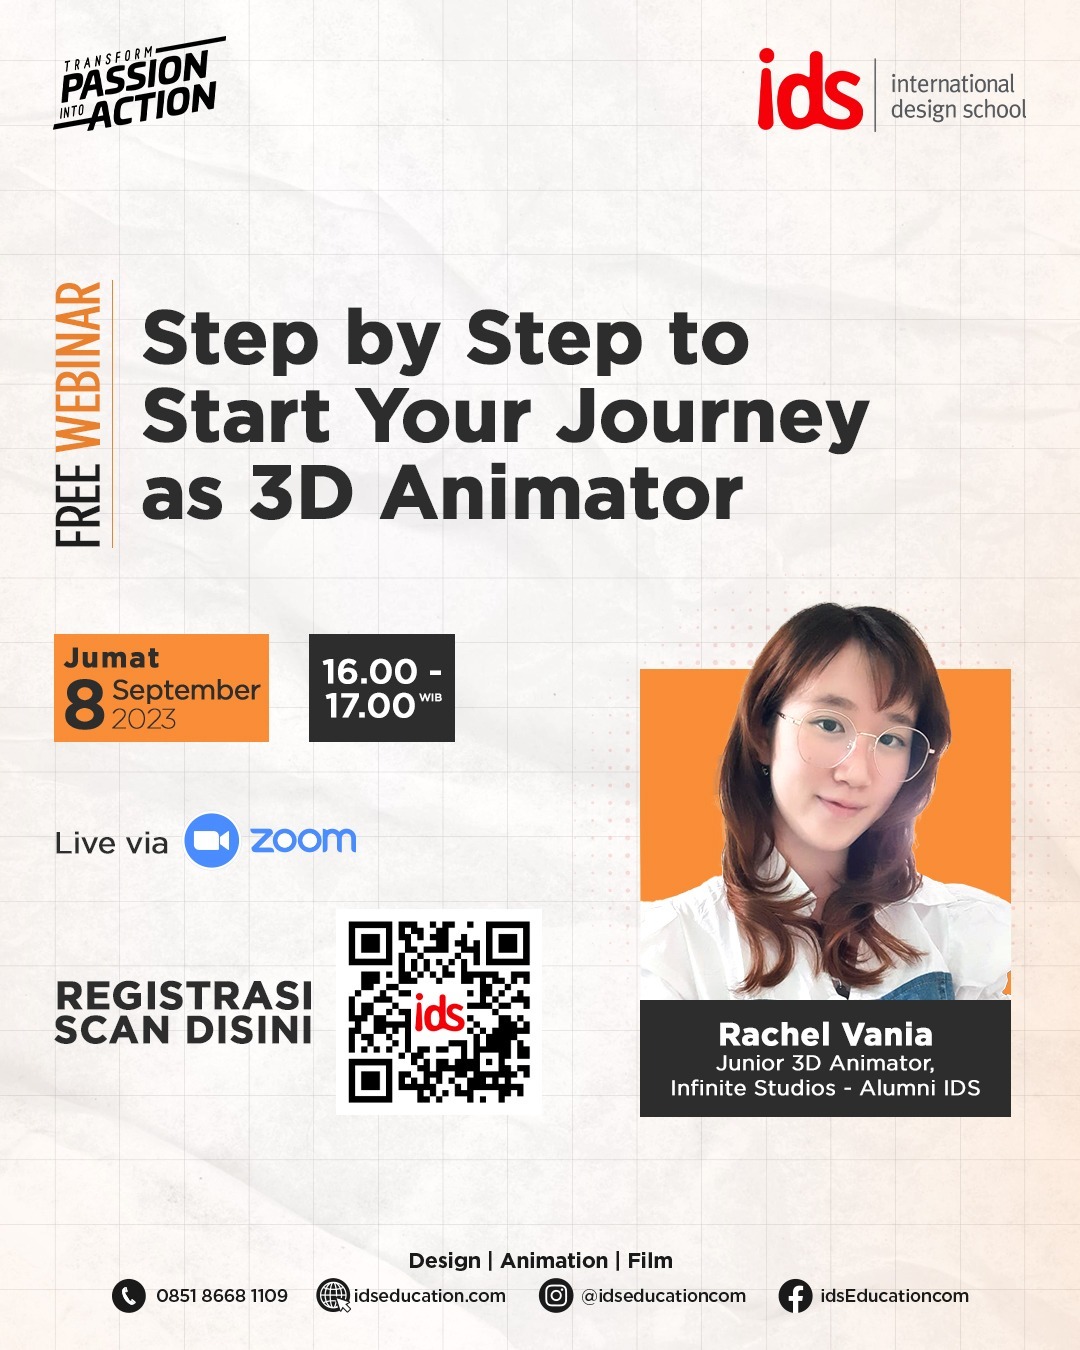 Step by step to Start Your Journey as 3D Animator